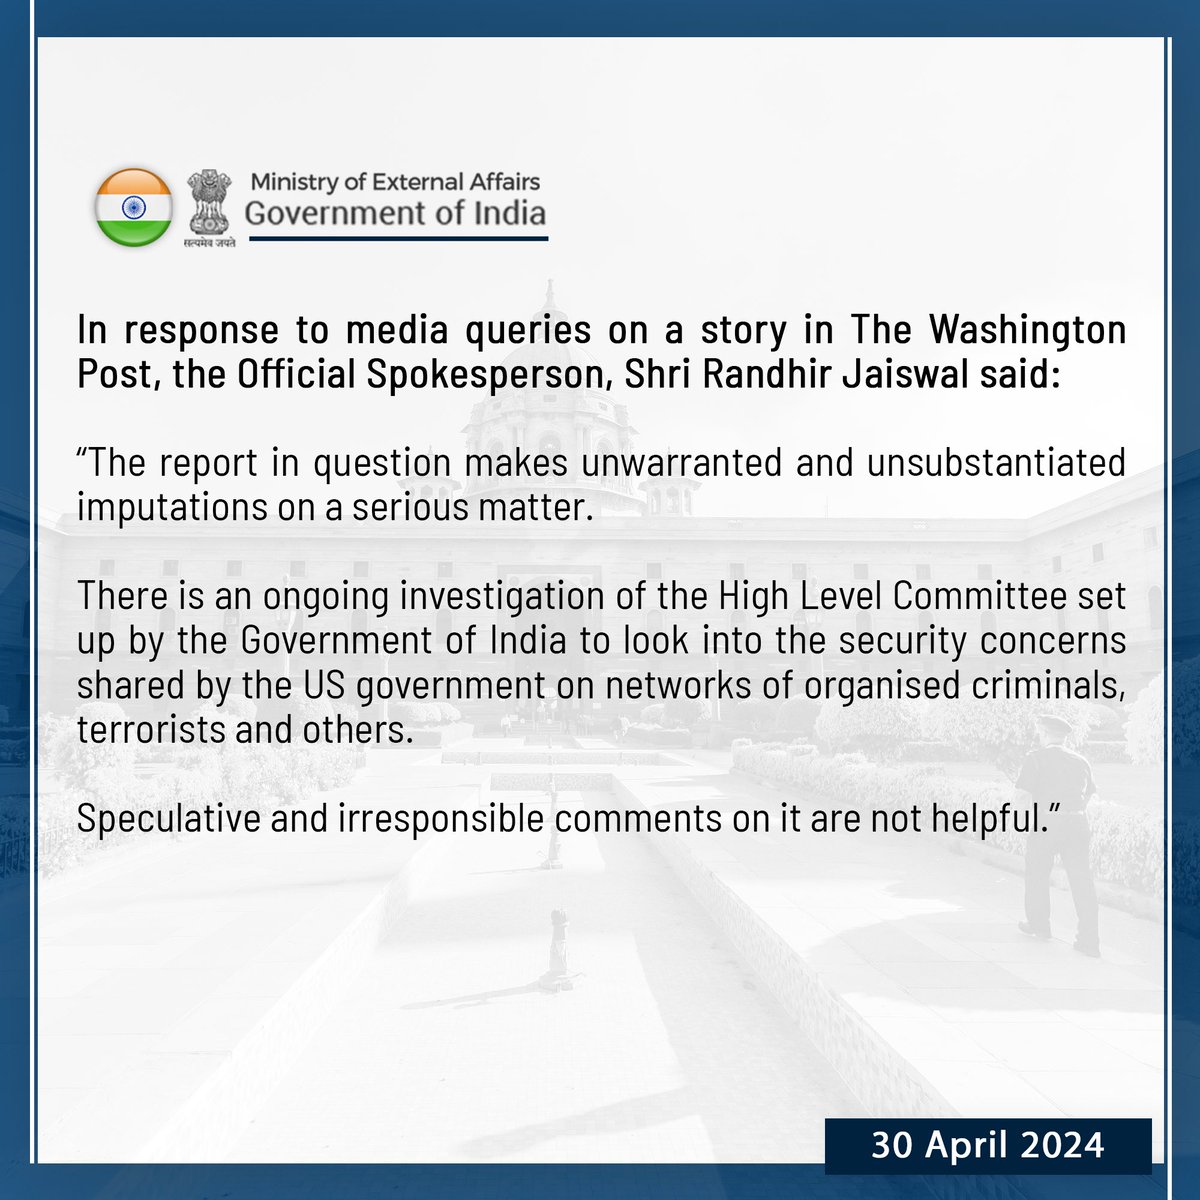 India rebuffs WaPo report on Pannun's killing plot, allegedly by RAW agents. @MEAIndia says the report 'makes unwarranted and unsubstantiated imputations on a serious matter.'